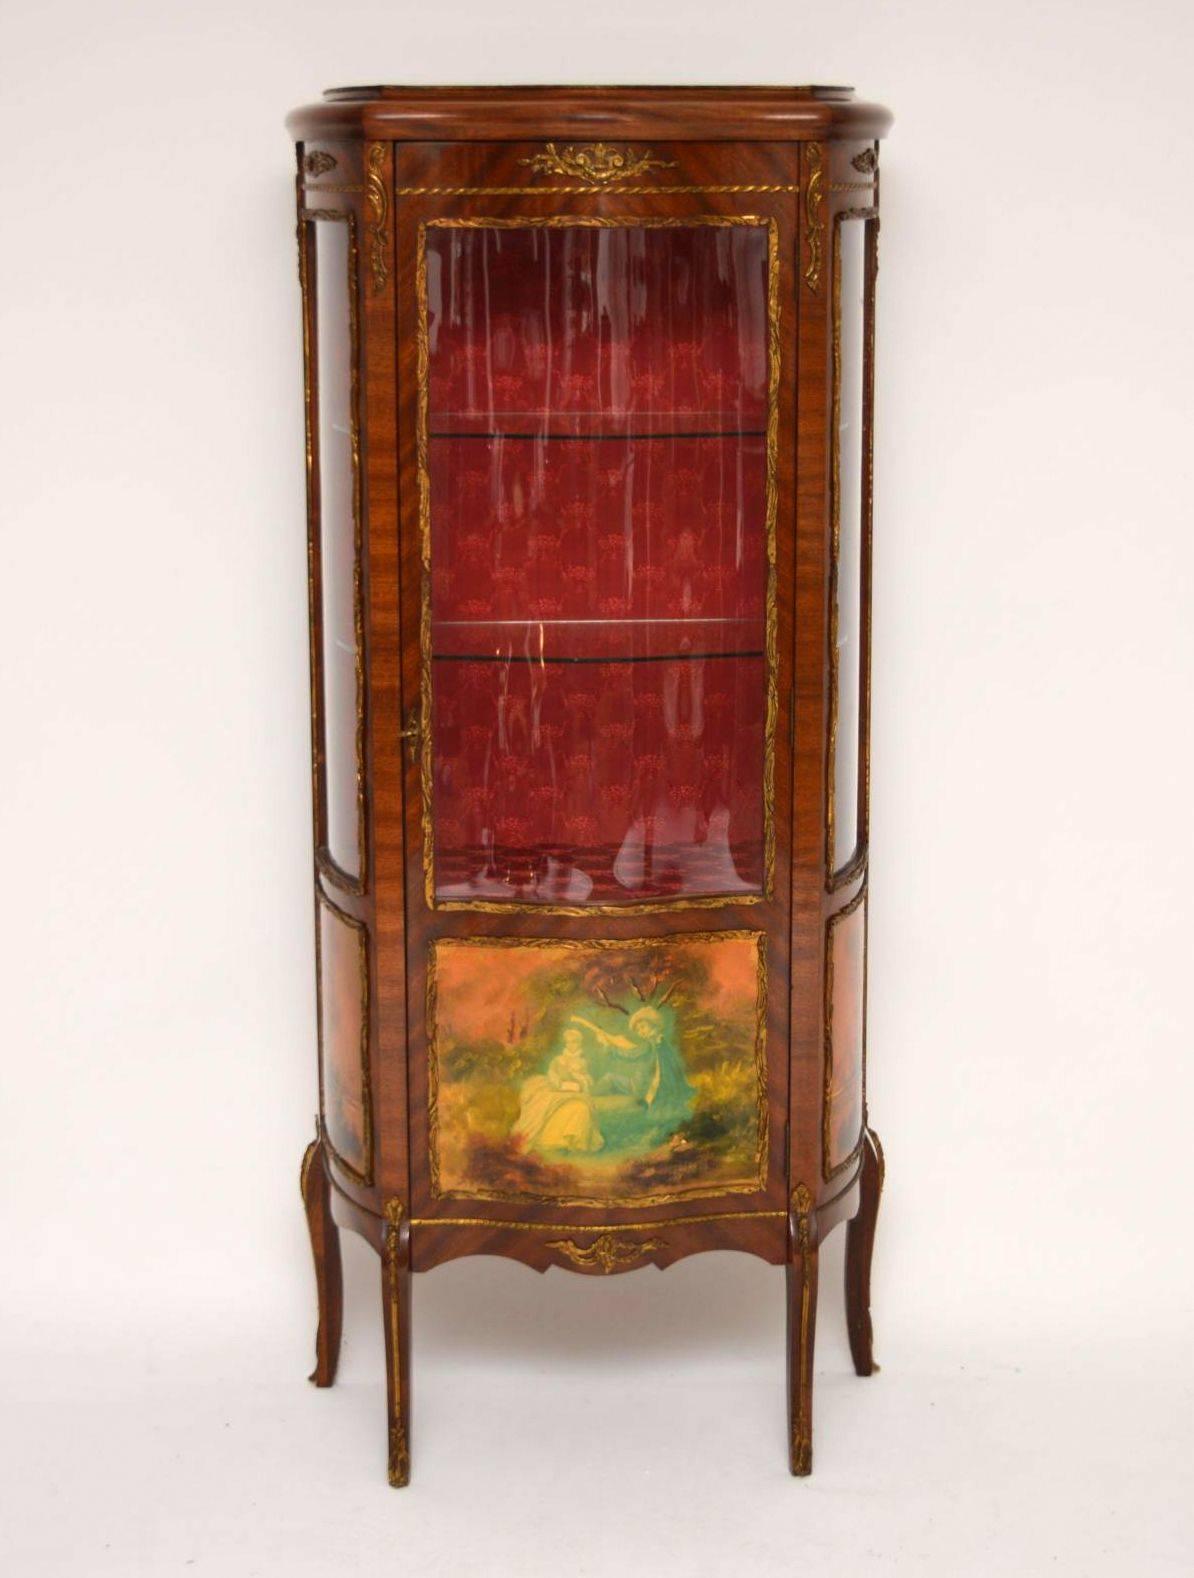 Antique French style serpentine fronted display cabinet of fairly small proportions, which I would date, circa 1930s-1950s period. It's predominately mahogany, with three decorative panels and is mounted with gilt metal. This cabinet is in good